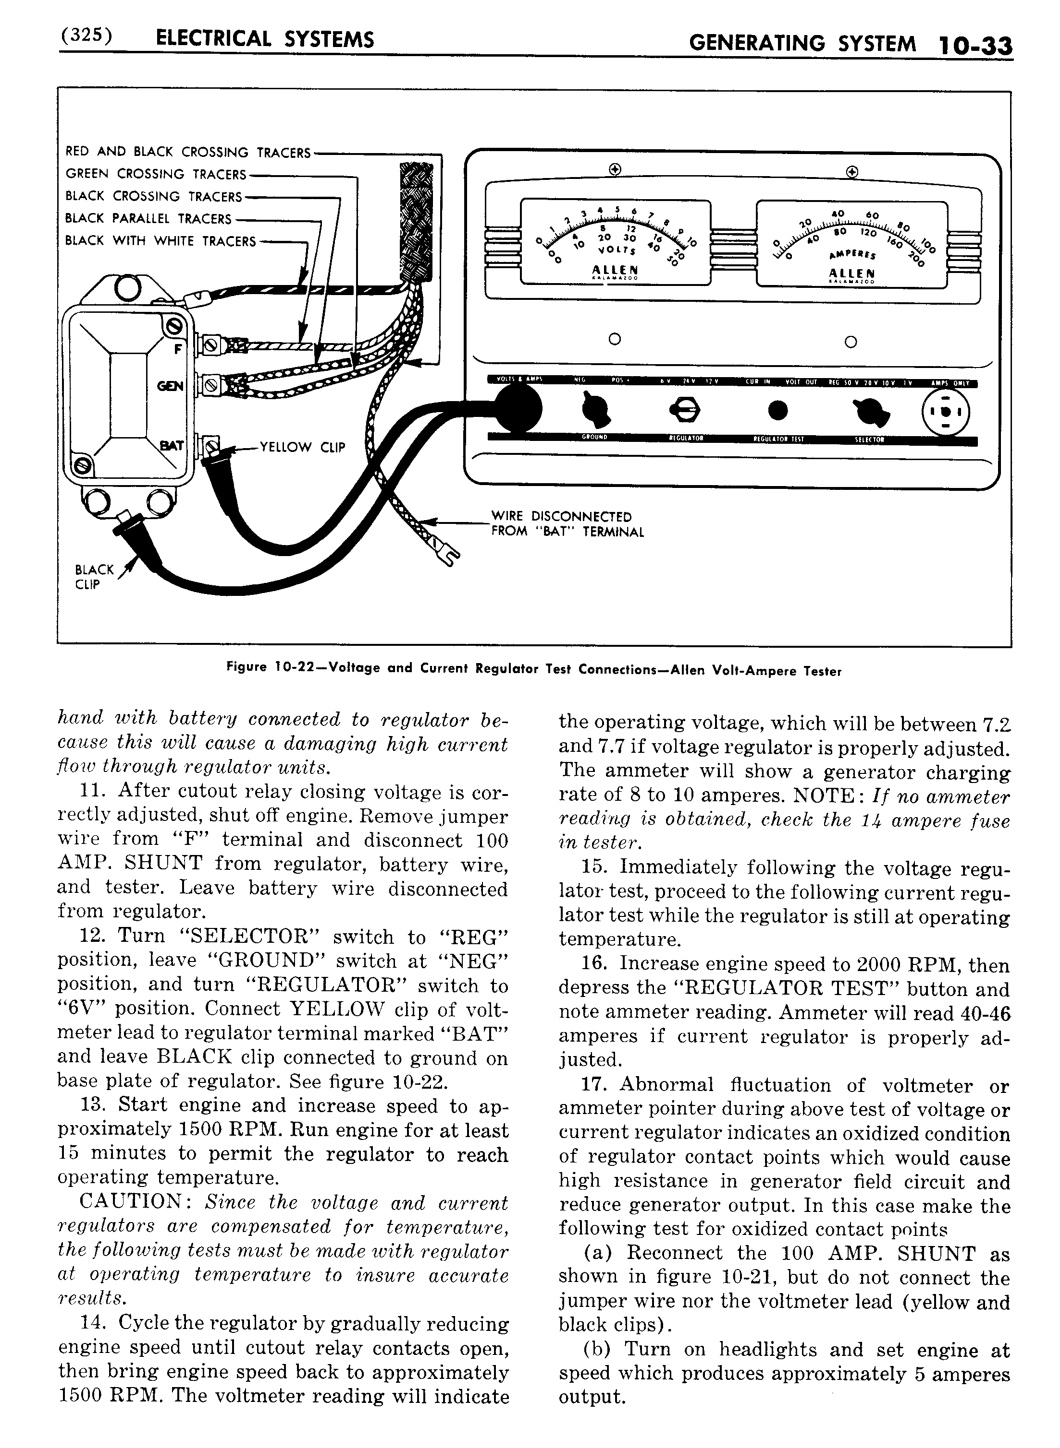 n_11 1951 Buick Shop Manual - Electrical Systems-033-033.jpg